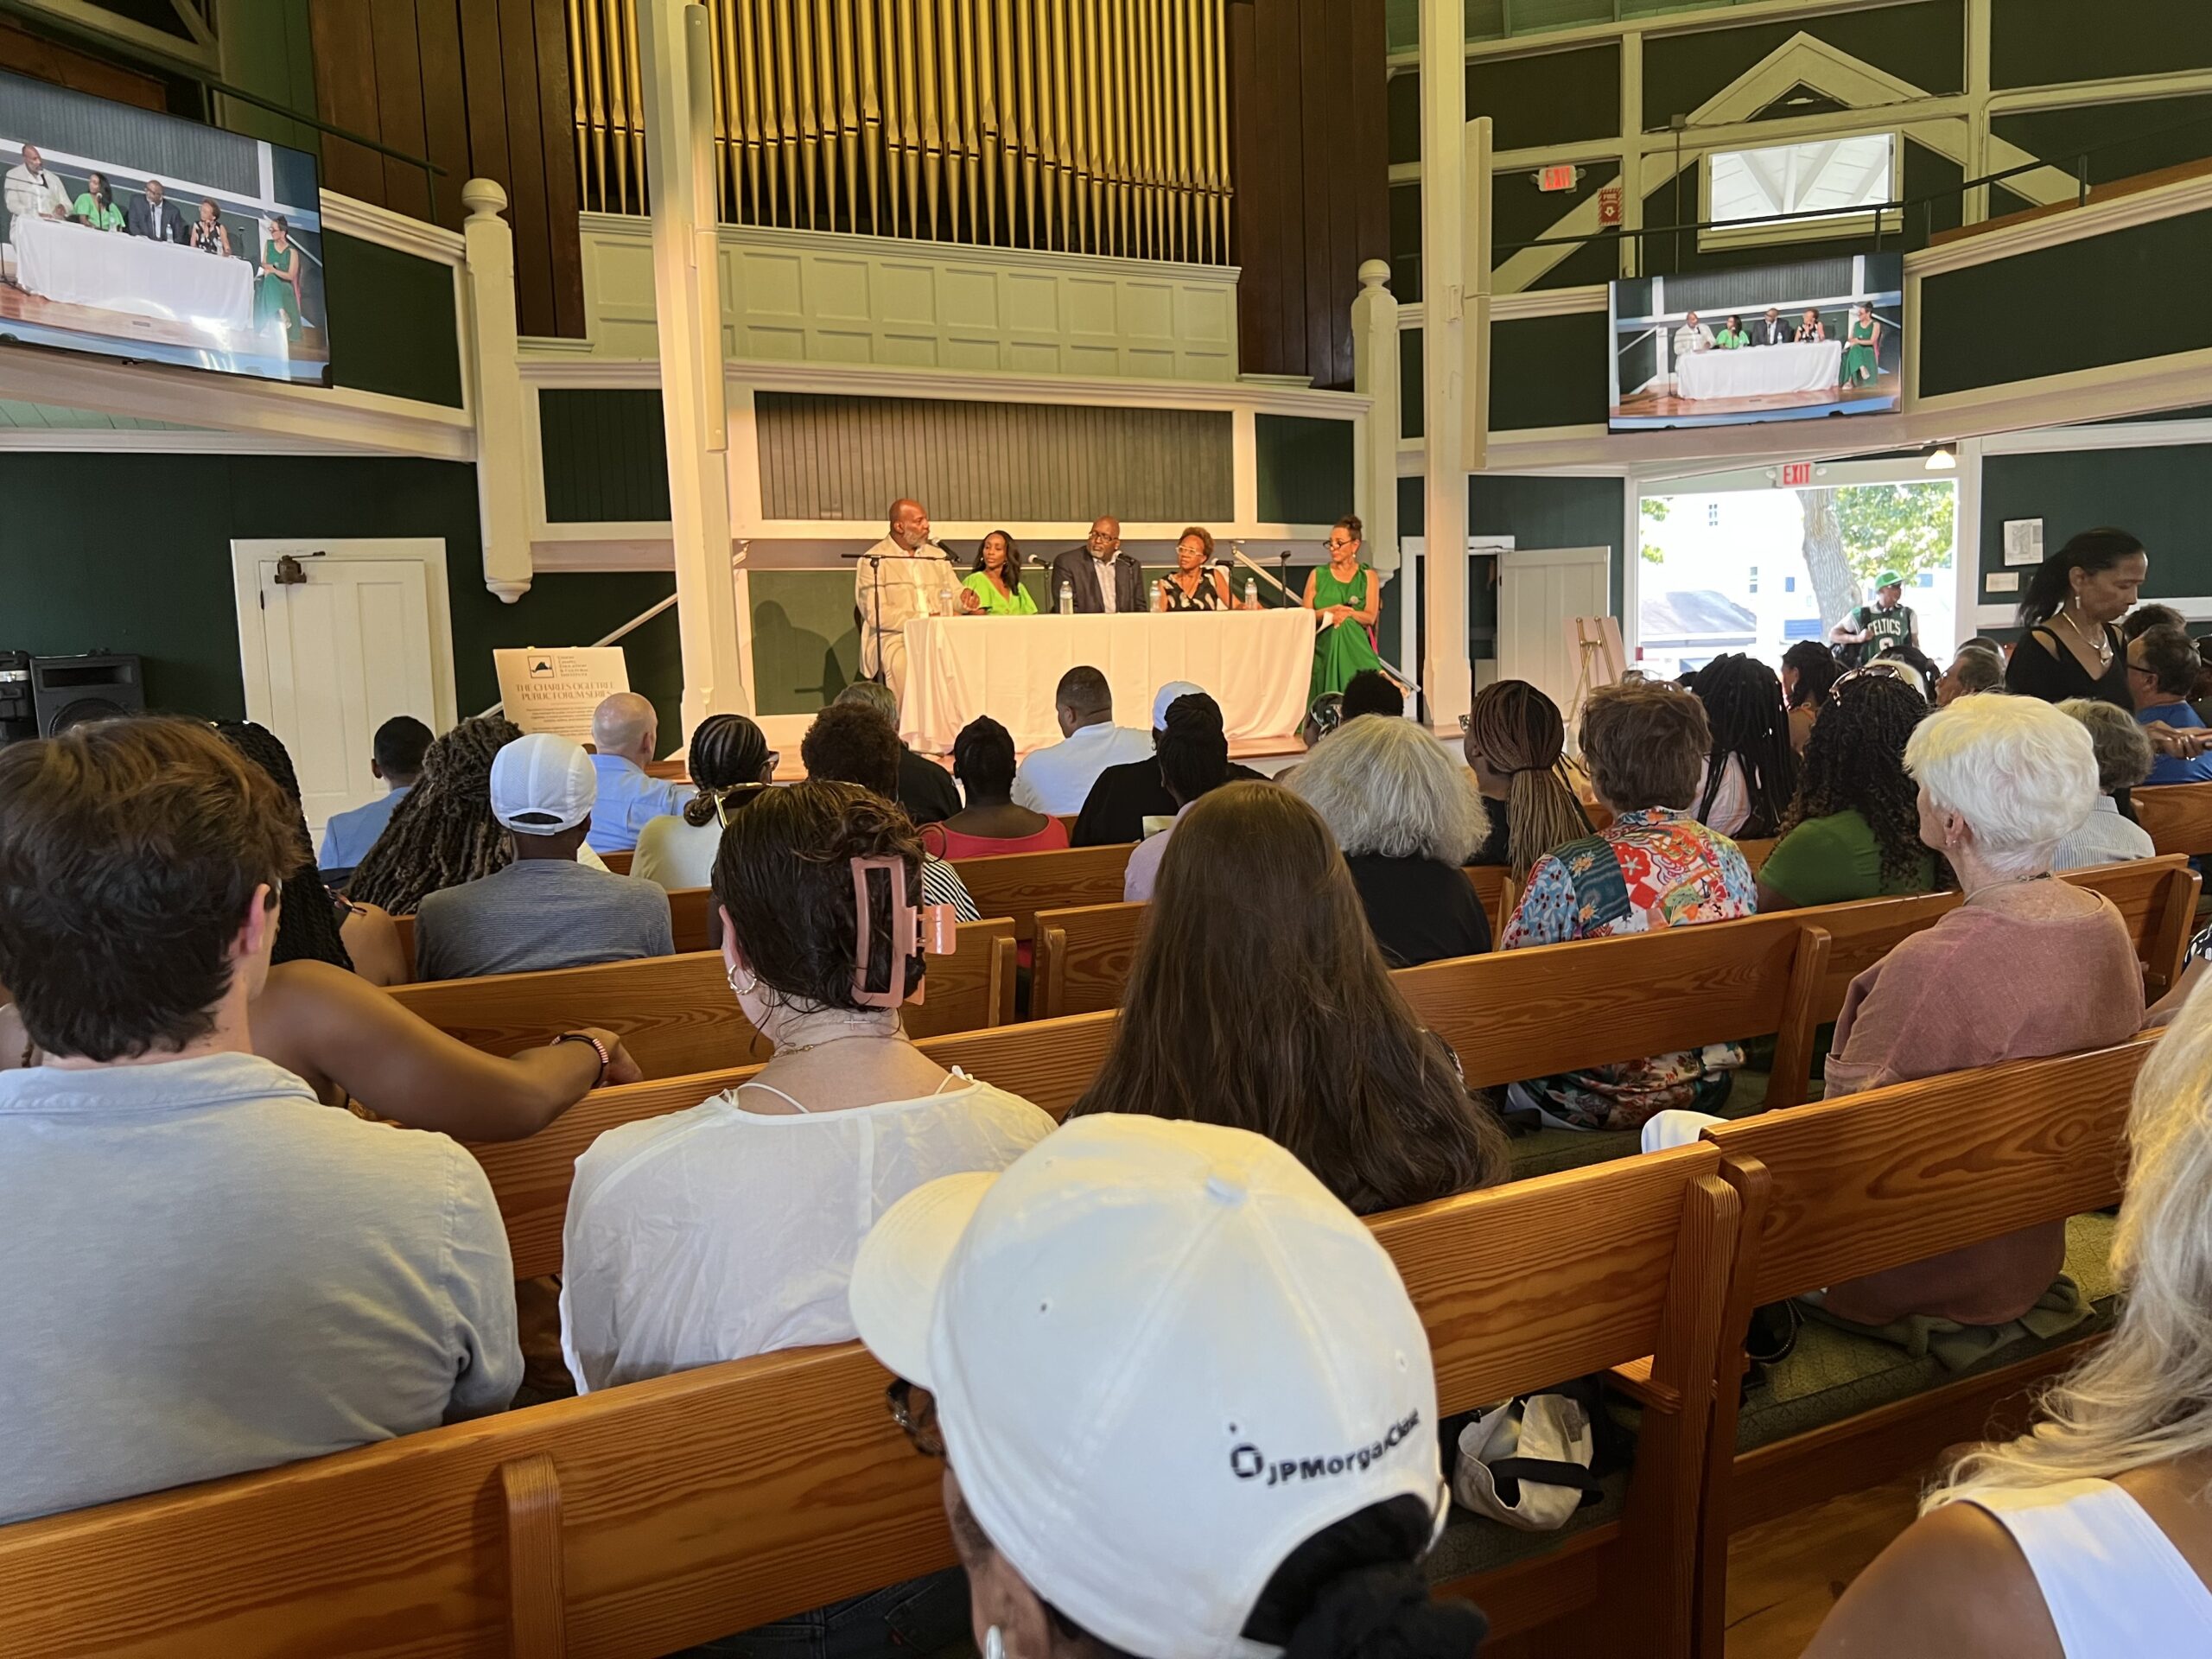 An audience at Union Chapel on Martha's Vineyard listens to prominet journalists discuss democracy and the press at an event hosted by the National Association of Black Journalists on Aug. 9, 2023, in Oak Bluffs, Massachusetts. Photo credit: Allison J. Davis, NABJ Black News & Views